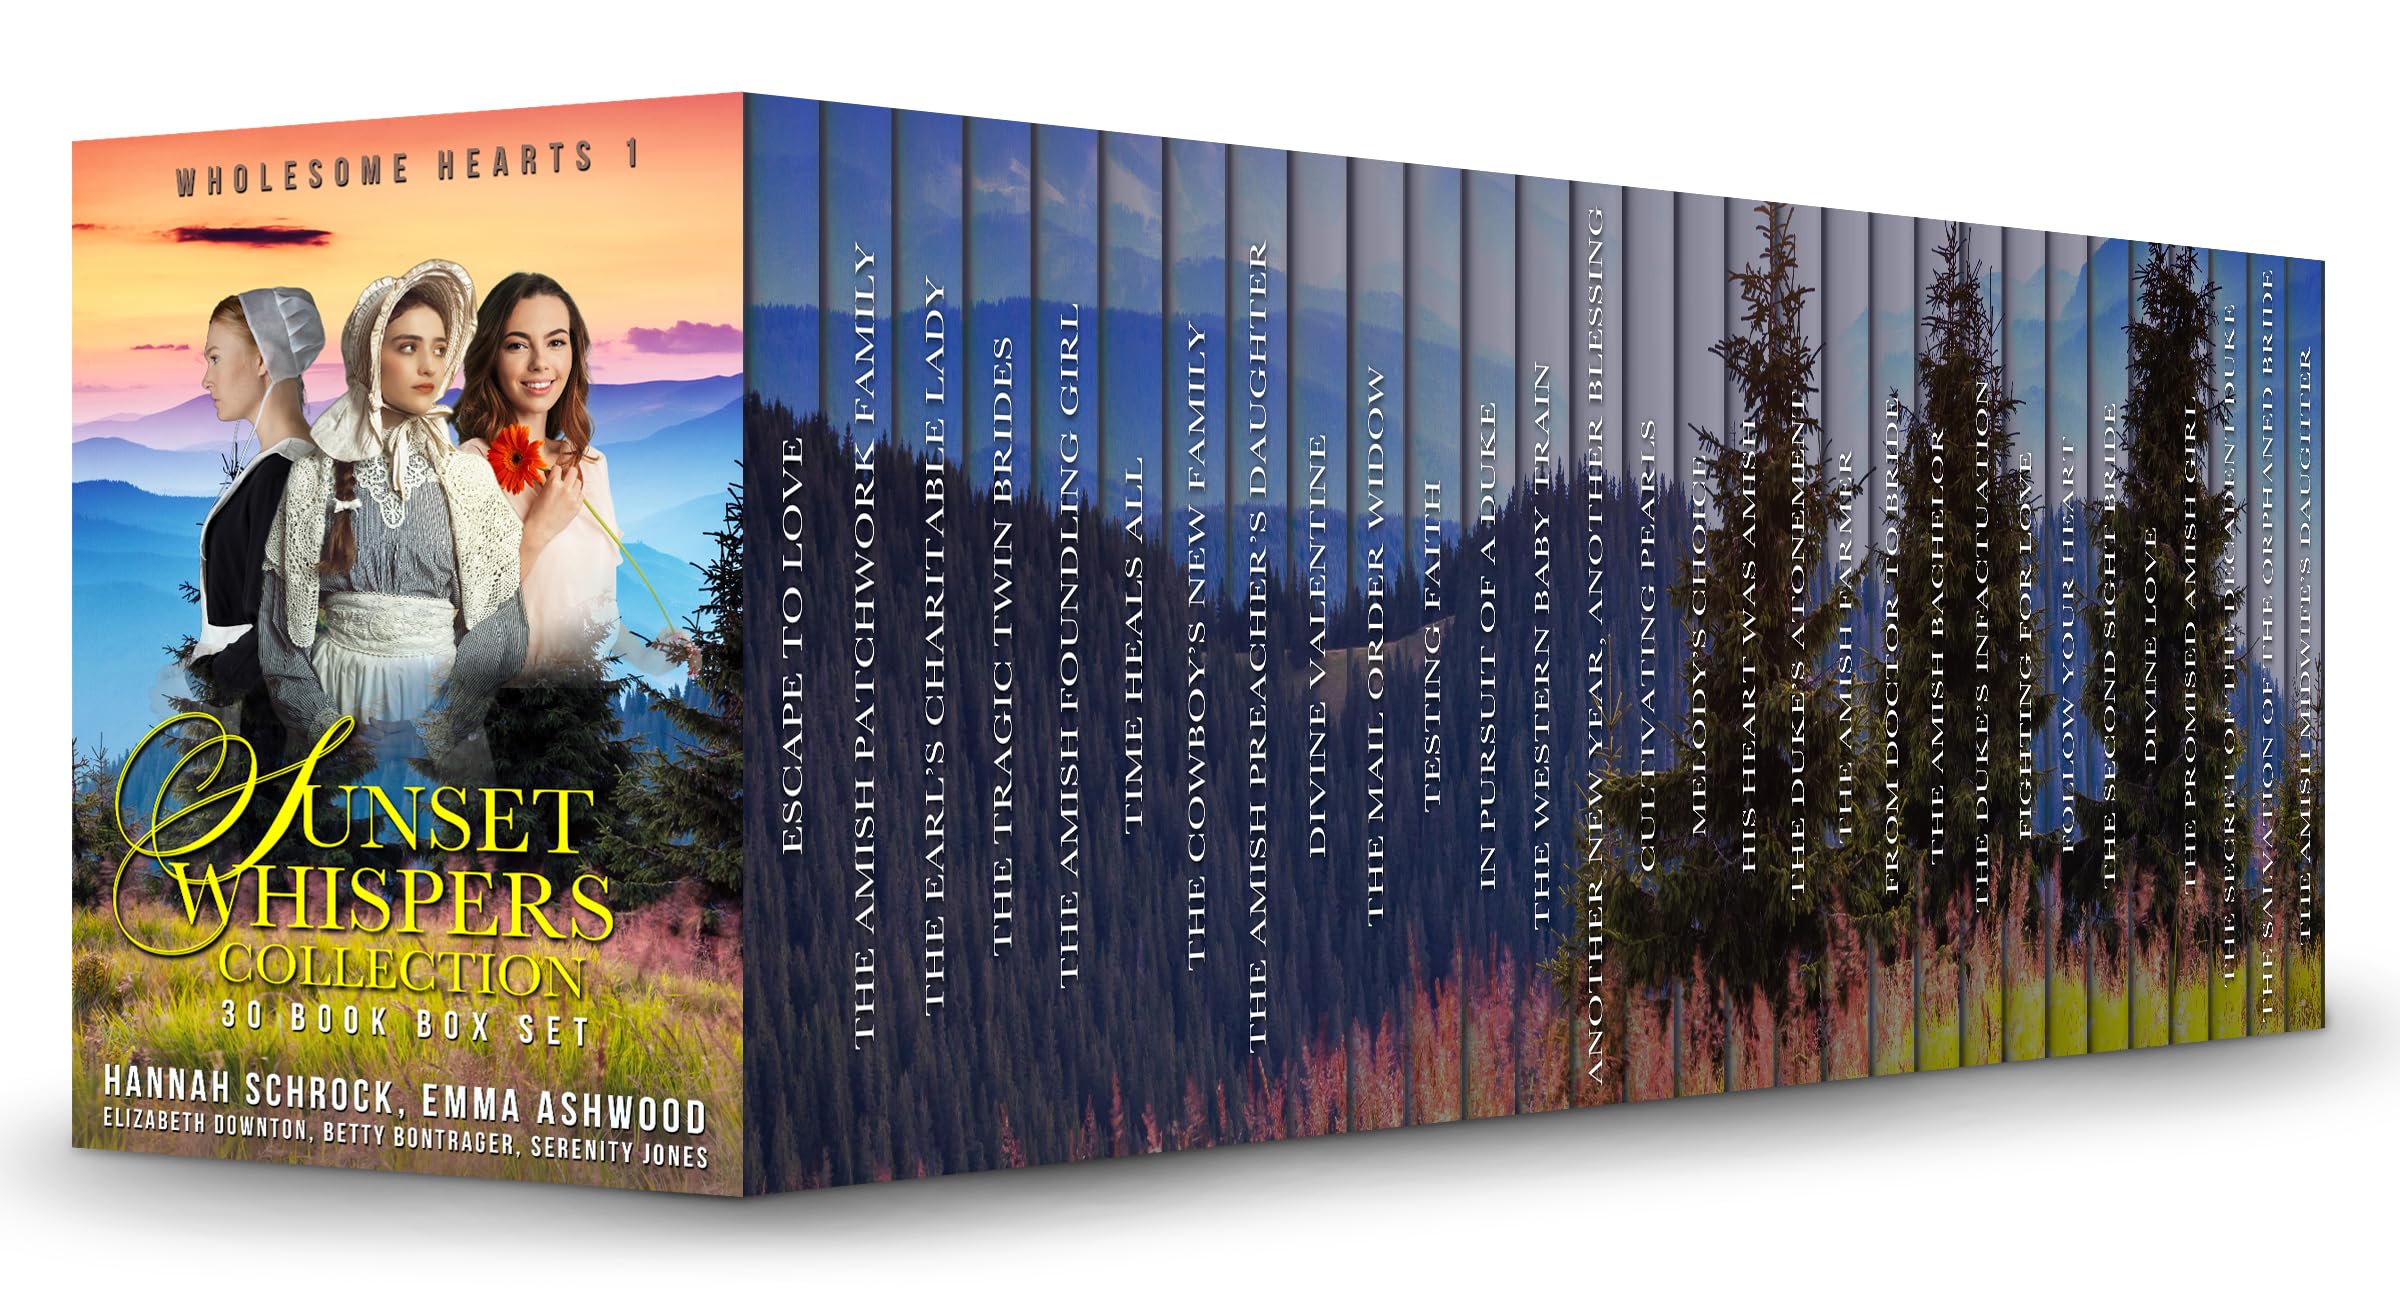 Sunset Whispers Collection (30 Book Box Set)